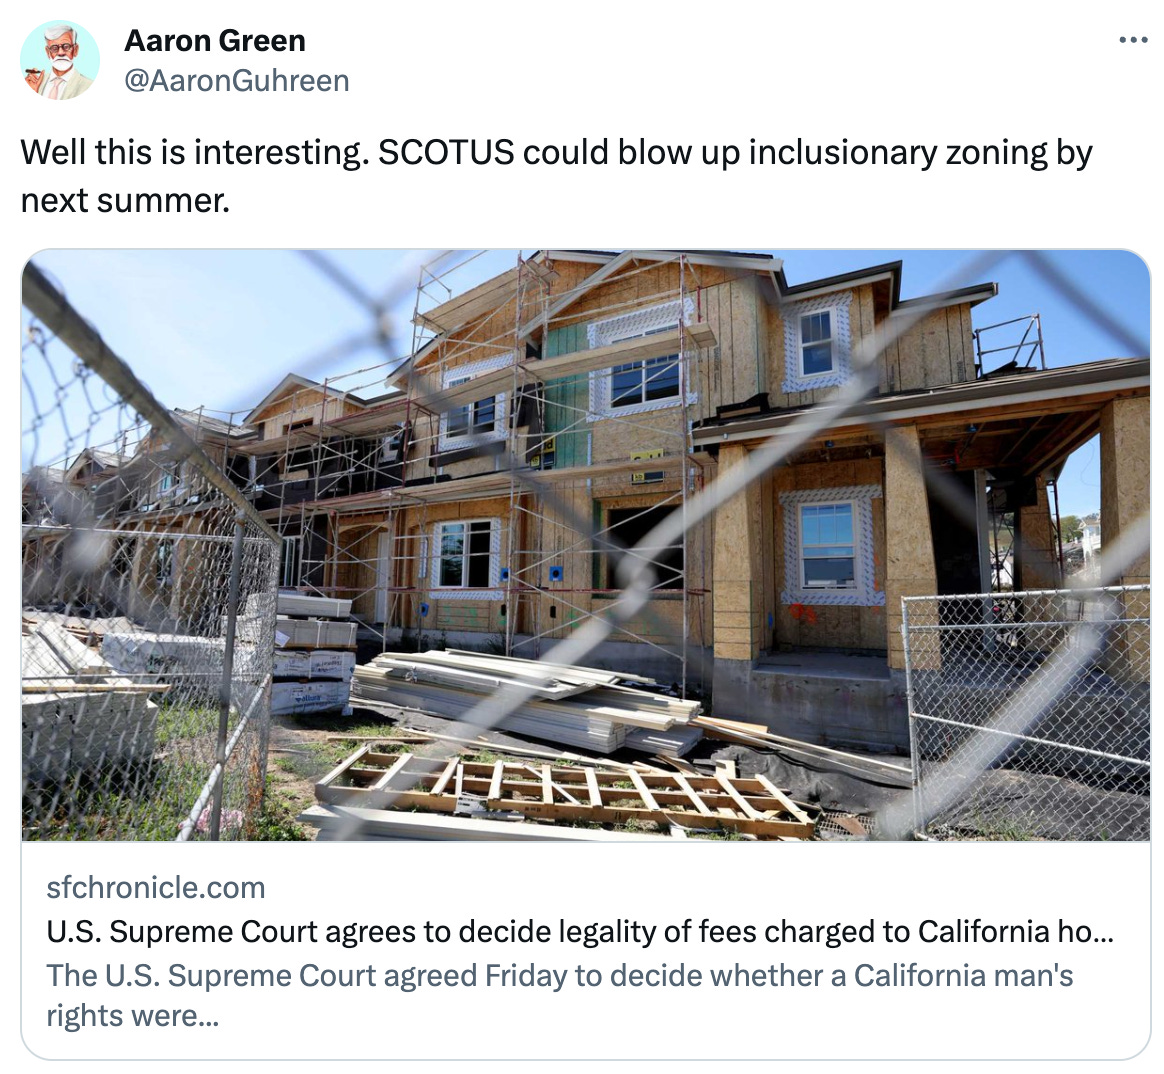  Aaron Green @AaronGuhreen Well this is interesting. SCOTUS could blow up inclusionary zoning by next summer. sfchronicle.com U.S. Supreme Court agrees to decide legality of fees charged to California homebuilders The U.S. Supreme Court agreed Friday to decide whether a California man's rights were...